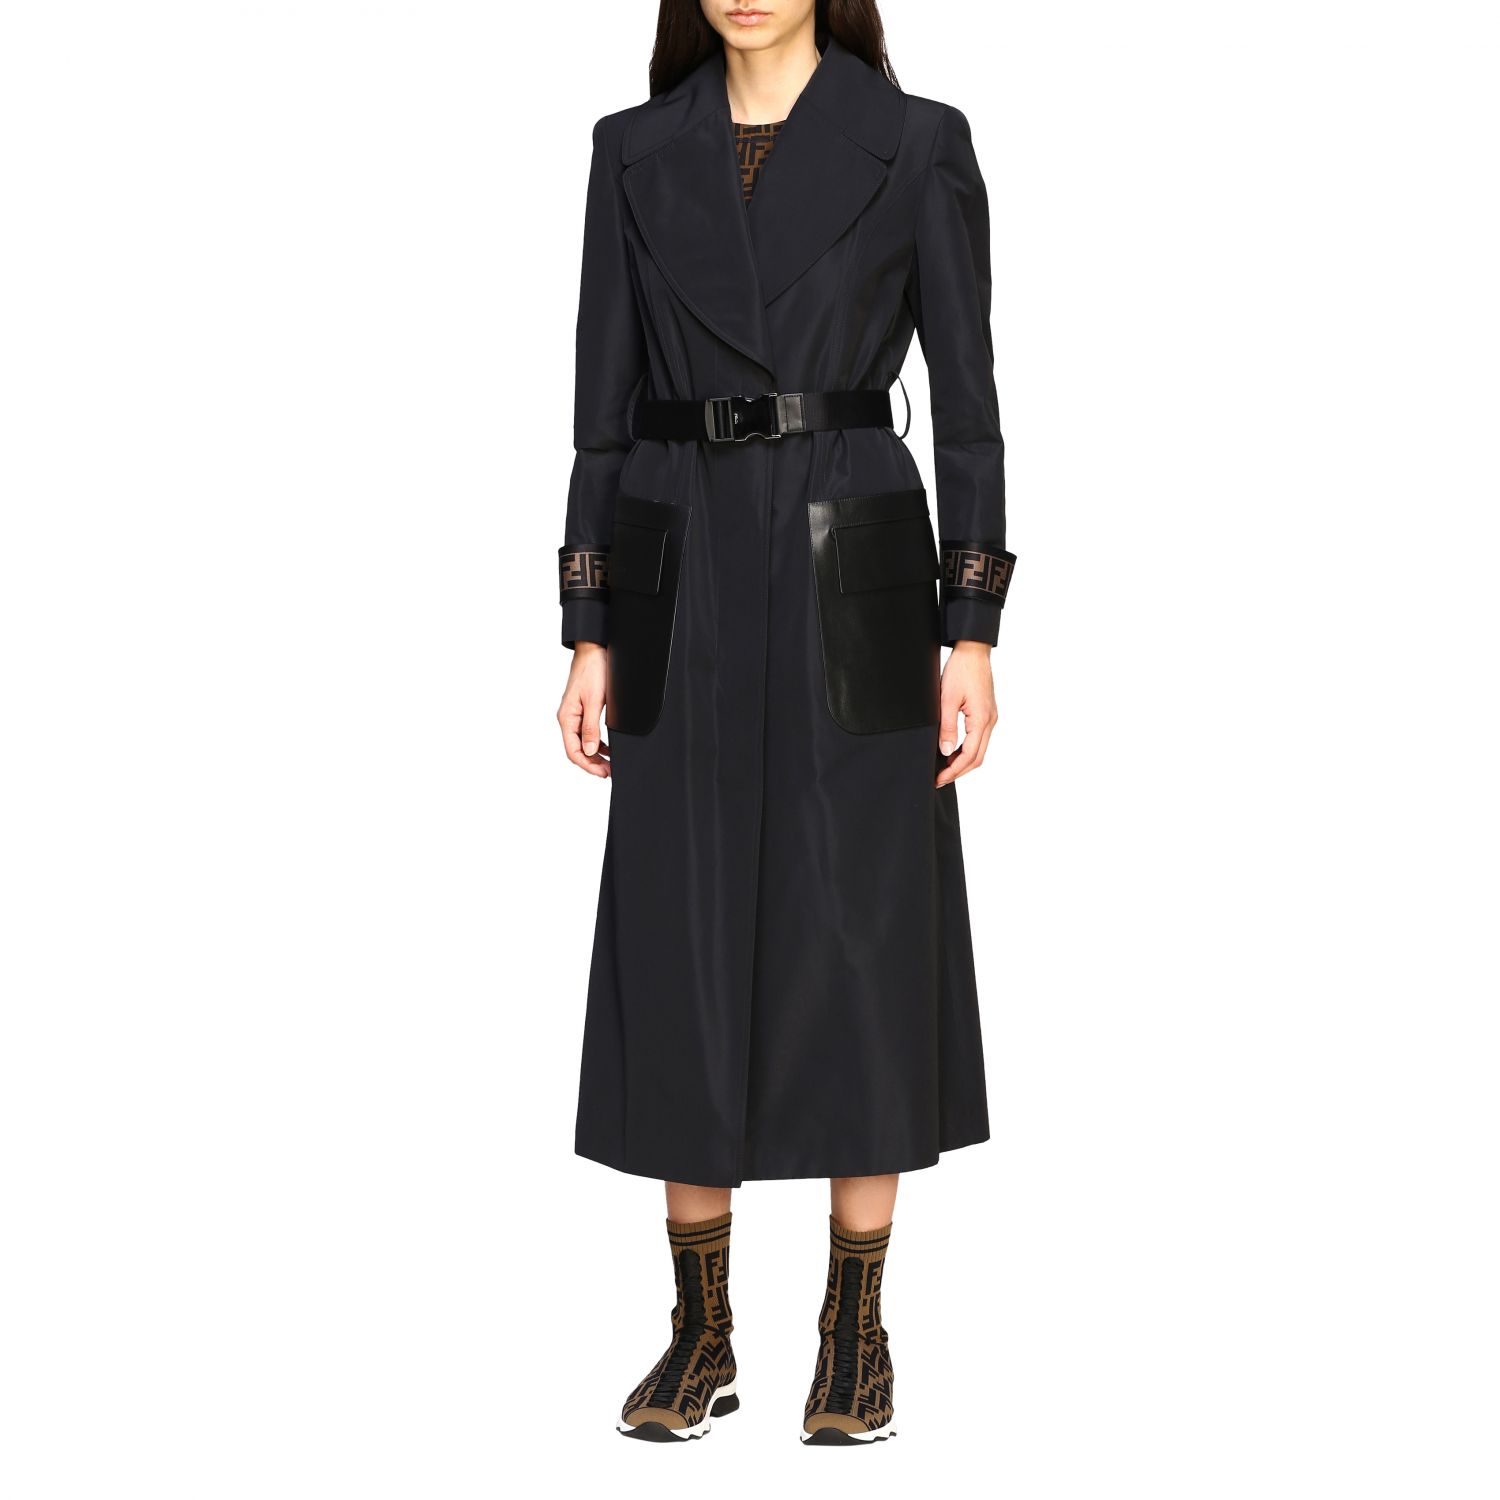 FENDI: long trench coat with FF bands and leather pockets | Coat Fendi ...